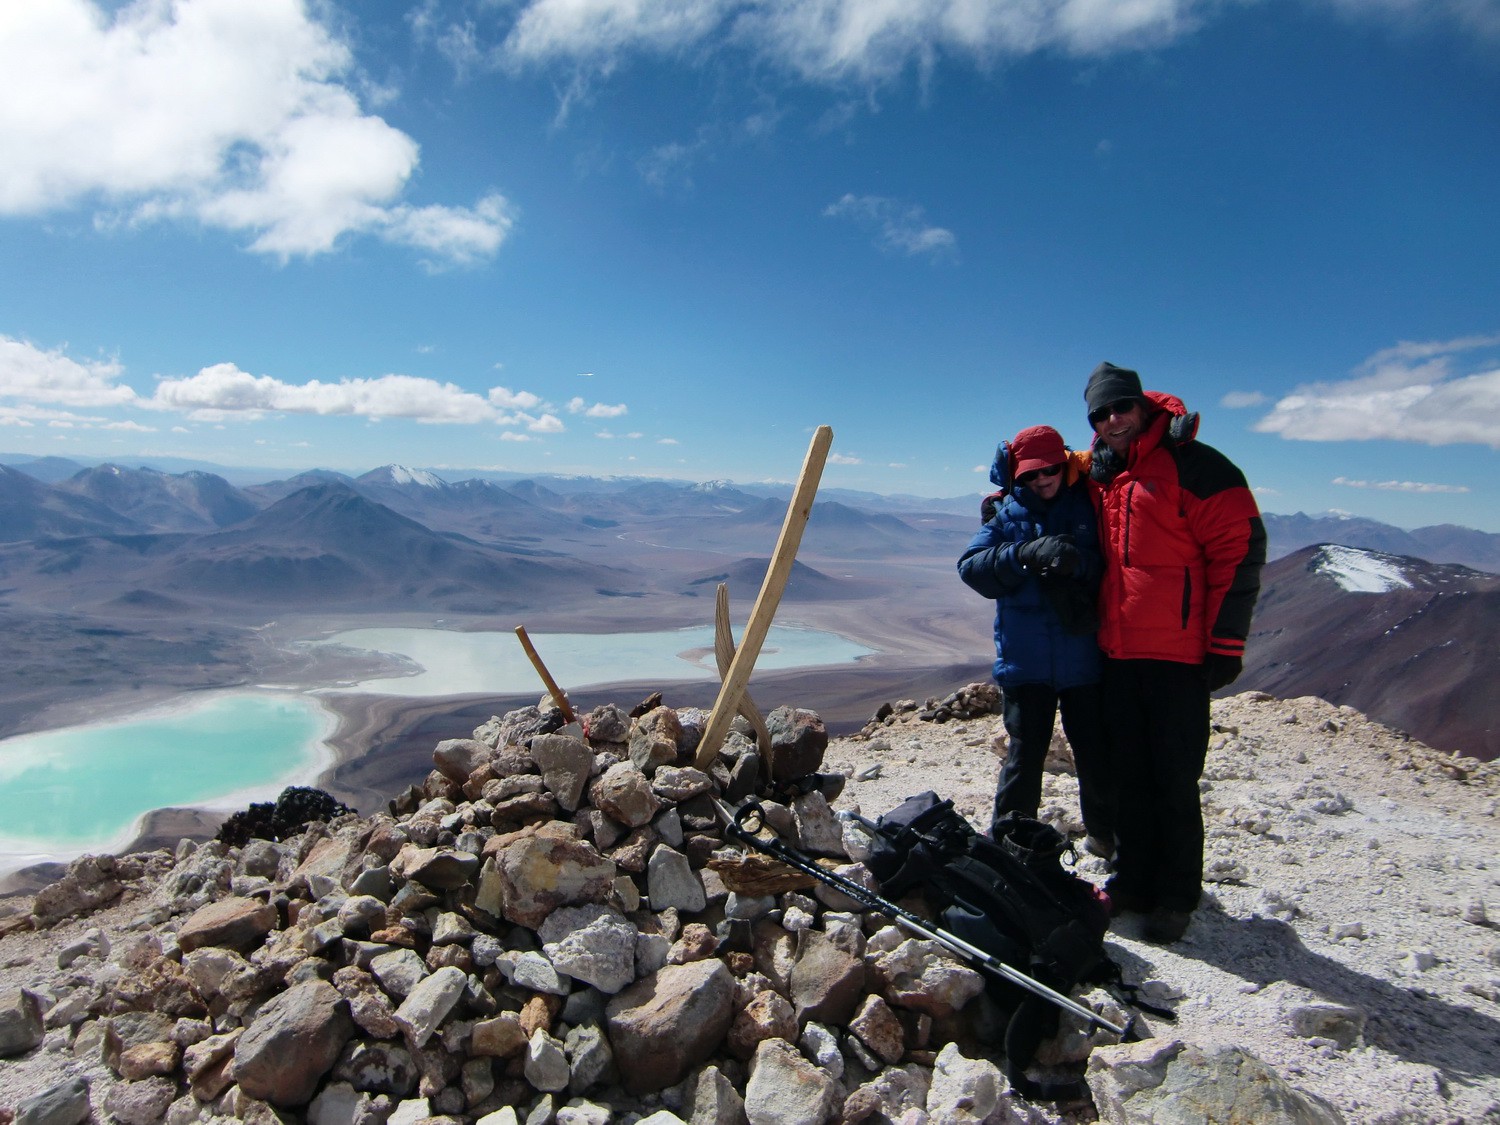 Marion and Alfred on the summit of Licancabur - 5,916 meters sea level